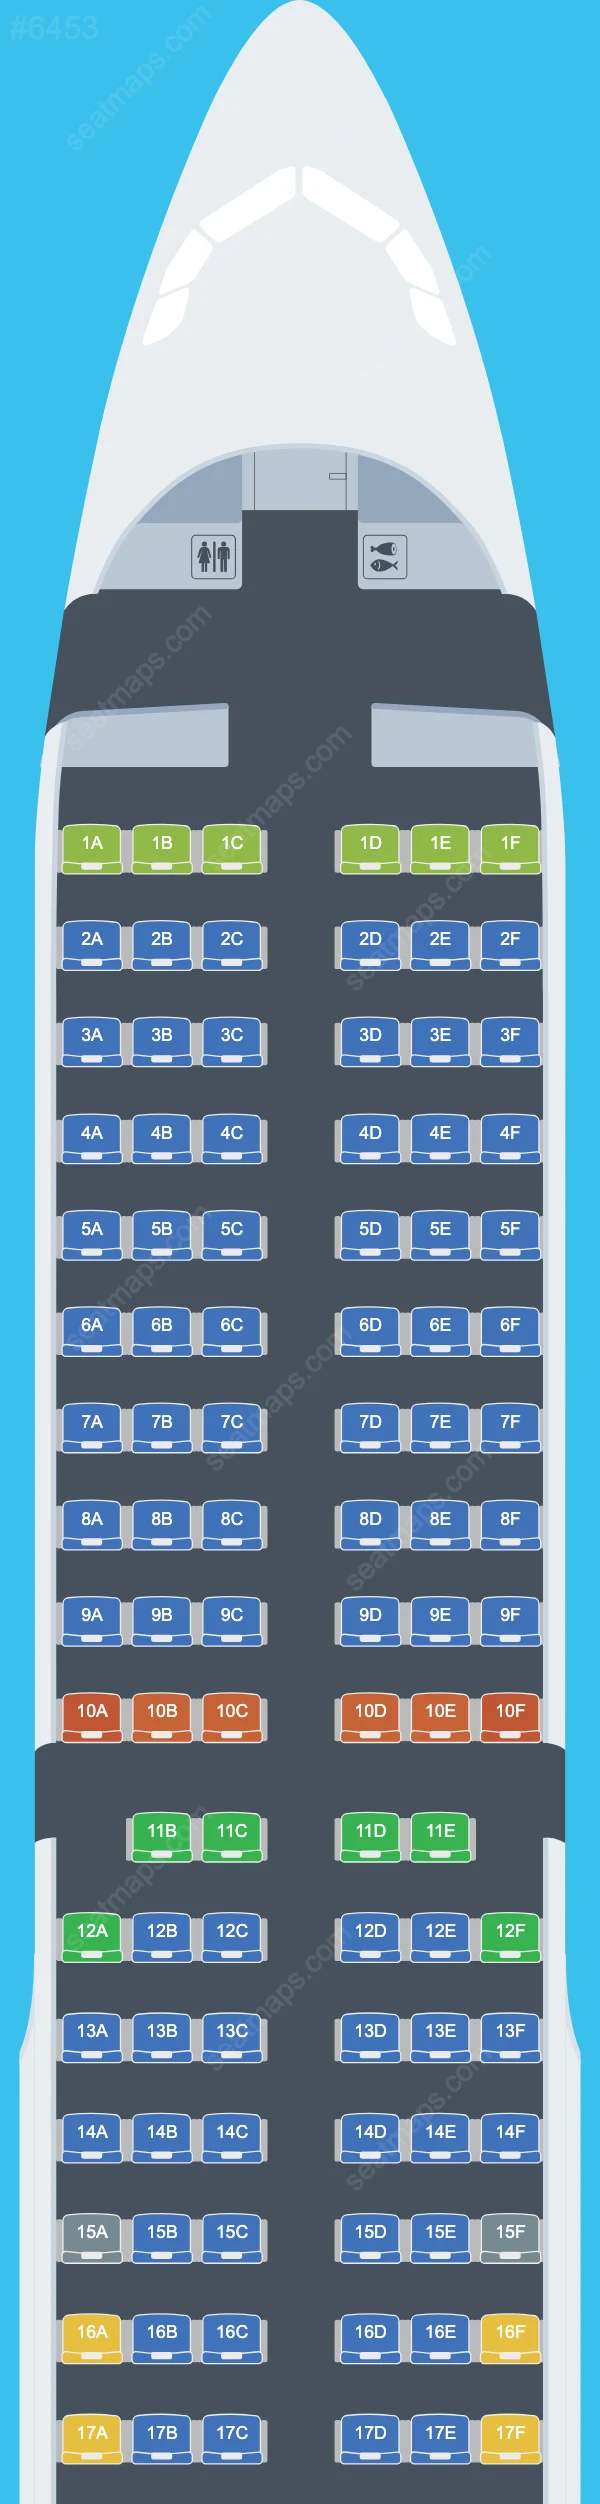 AirBlue Airbus A321-200 seatmap preview